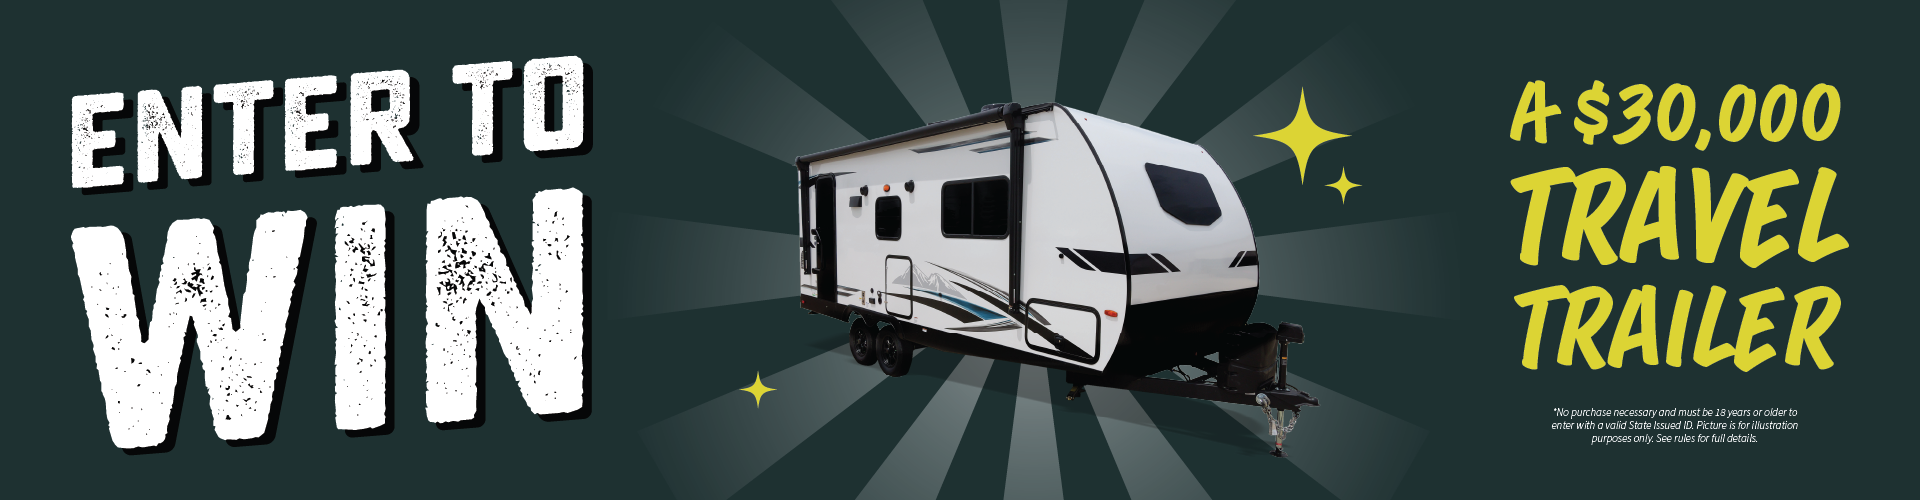 Enter to Win a $30,000 Travel Trailer!